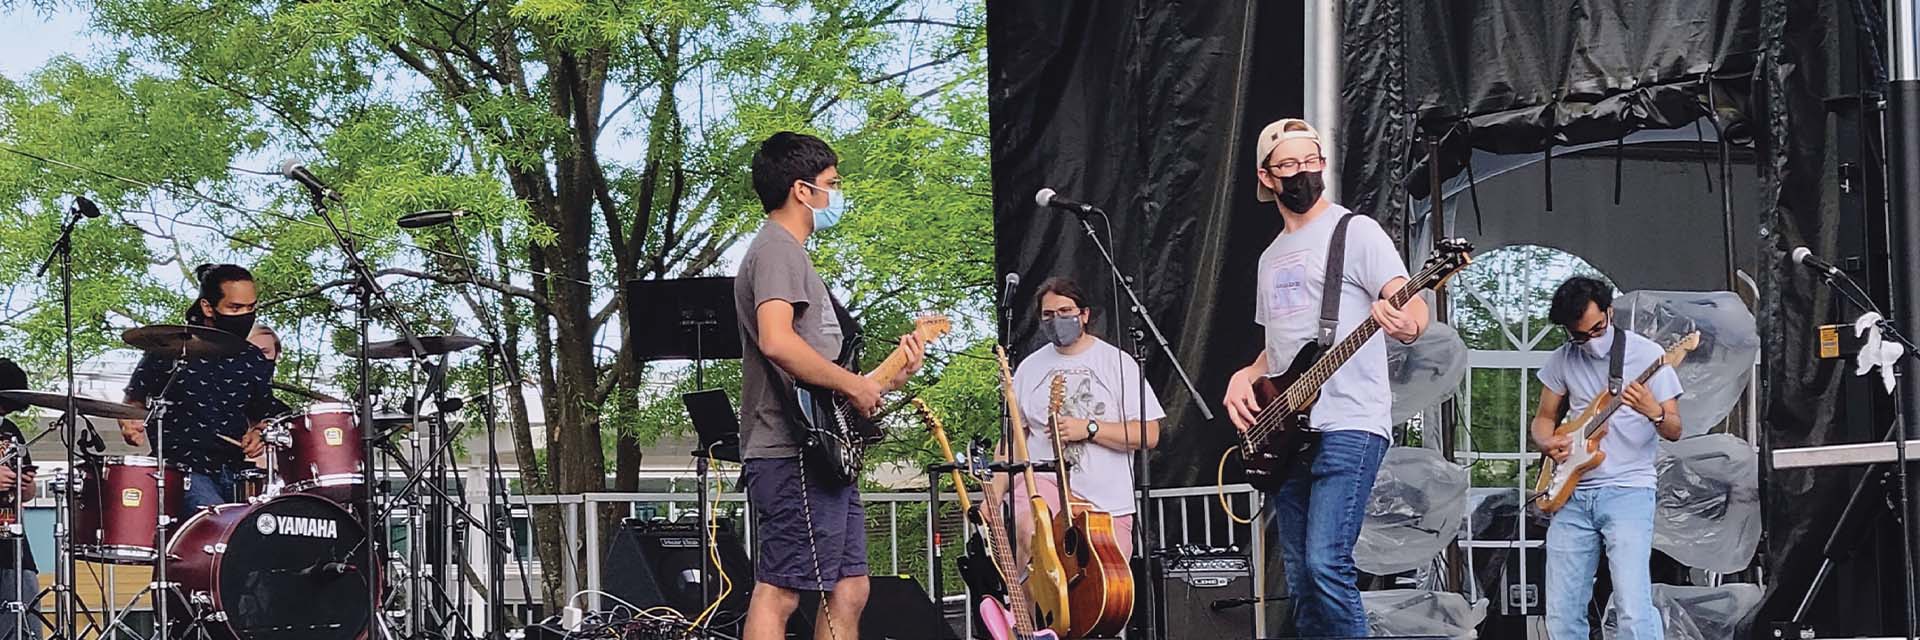 Rock and pop band performs on outdoor stage